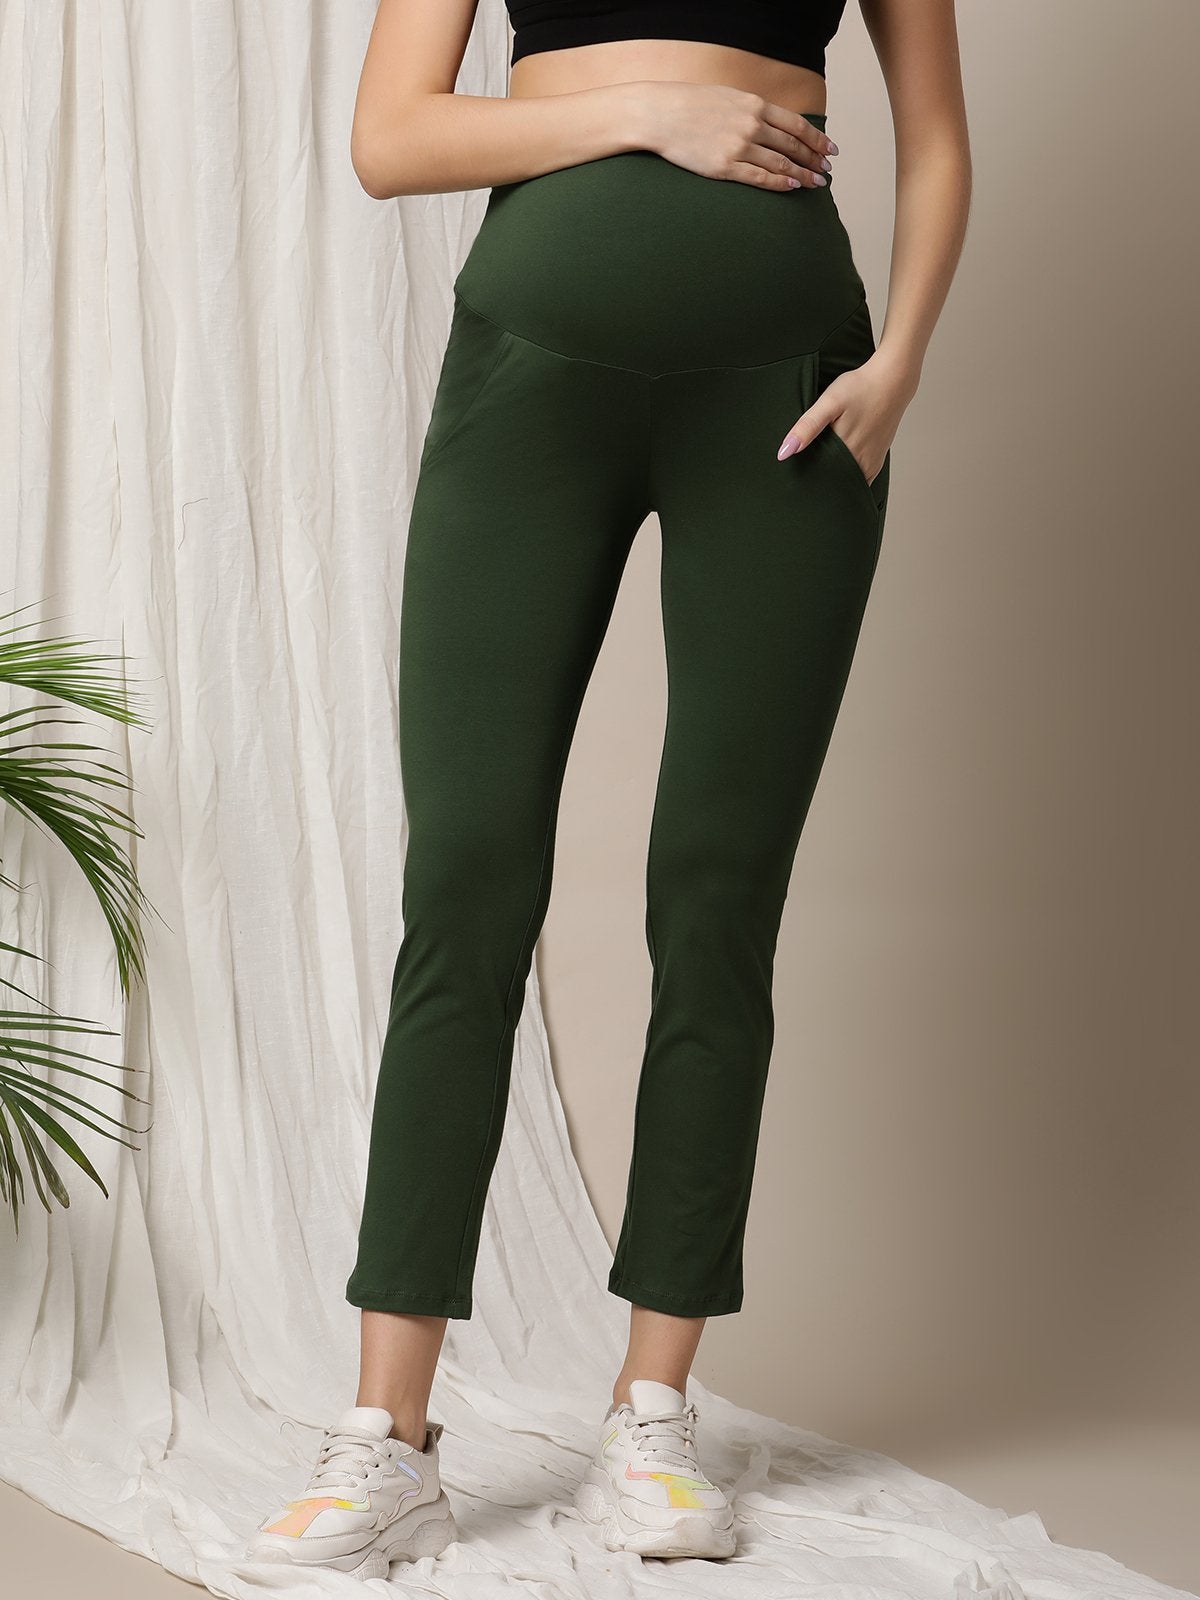 High-Rise Over Belly Skinny Maternity Pants - Isabel Maternity by Ingrid &  | eBay